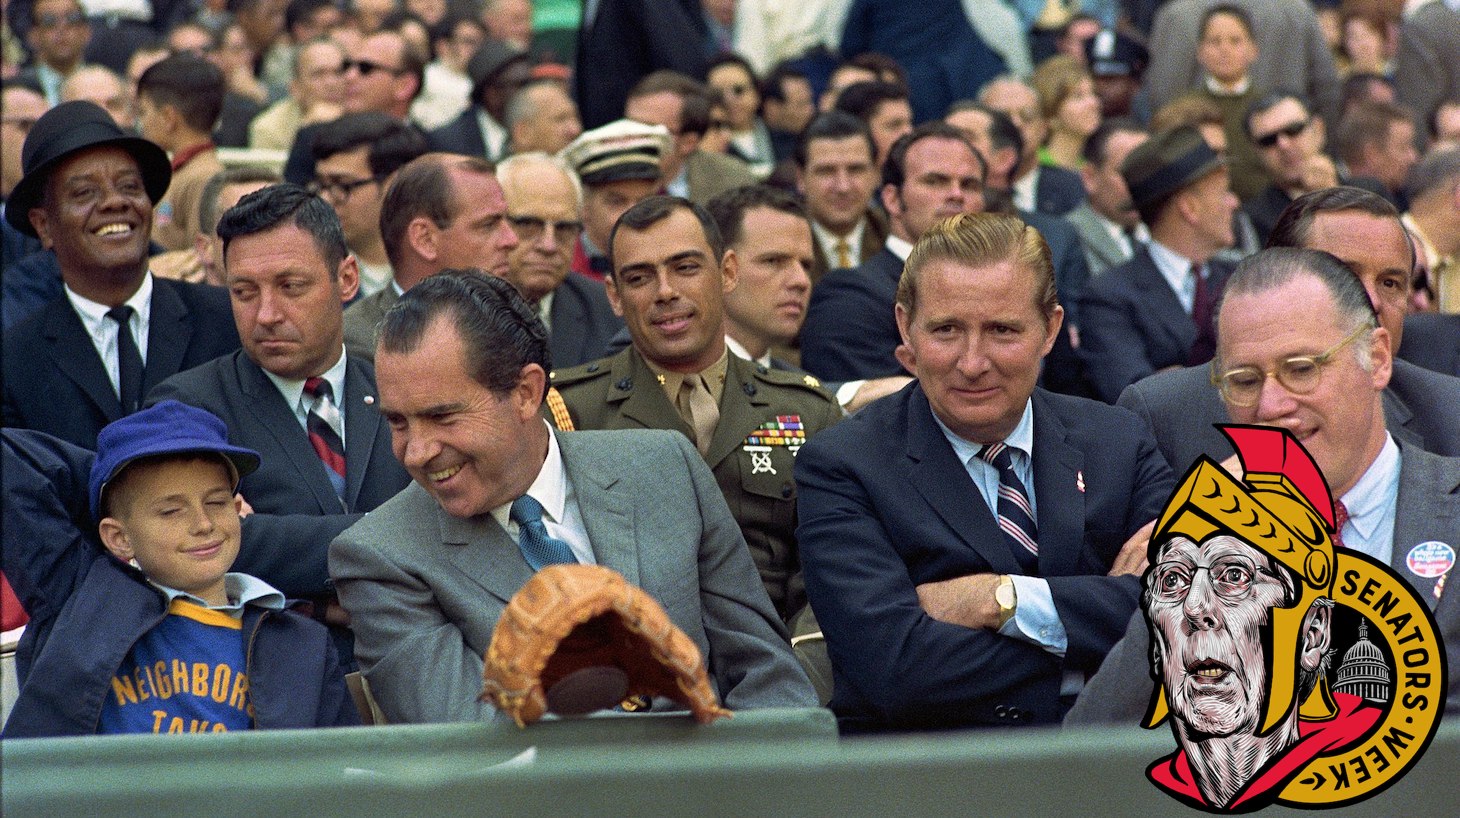 President Nixon holds "a frank exchange of views" with a young basefall fan at the Washington Senators' Opening Day game versus the New York Yankees at RFK Stadium